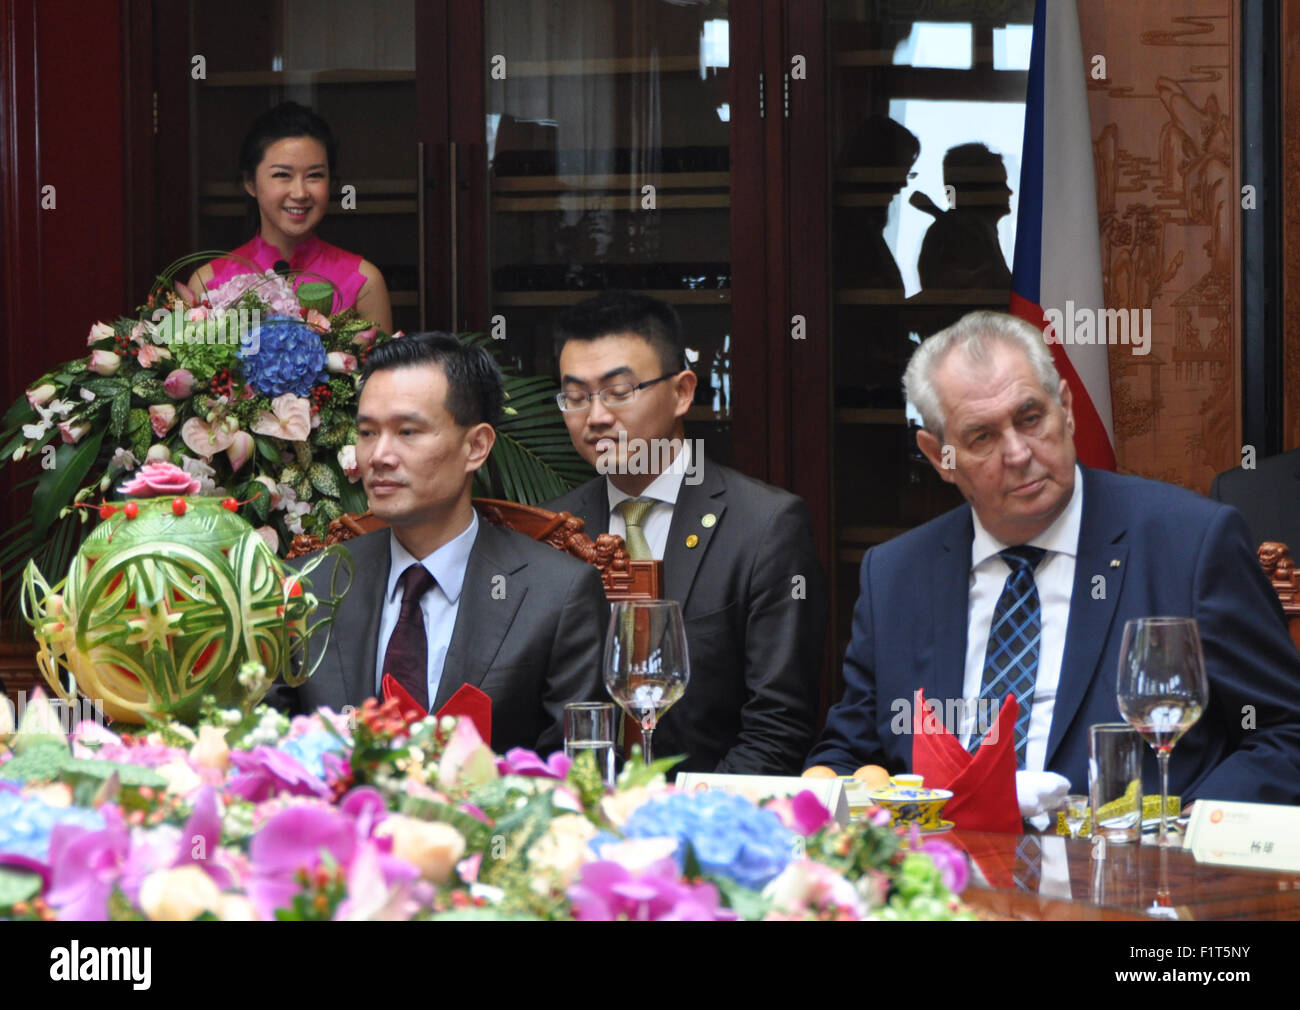 Czech President Milos Zeman, right, currently on an official visit to China, attended the signature of important agreements between the Chinese investment group CEFC and Czech firms, in Shanghai, China, on Saturday, September 5, 2015. During his visit to China, Zeman took part in a military parade on the occasion of the celebrations of the 70 anniversary of the end of World War Two in Asia and had talks with his Chinese counterpart Xi Jinping. The Chinese president accepted Zeman´s invitation to come to the Czech Republic. The visit is to take place next year. At the left there is board chairm Stock Photo